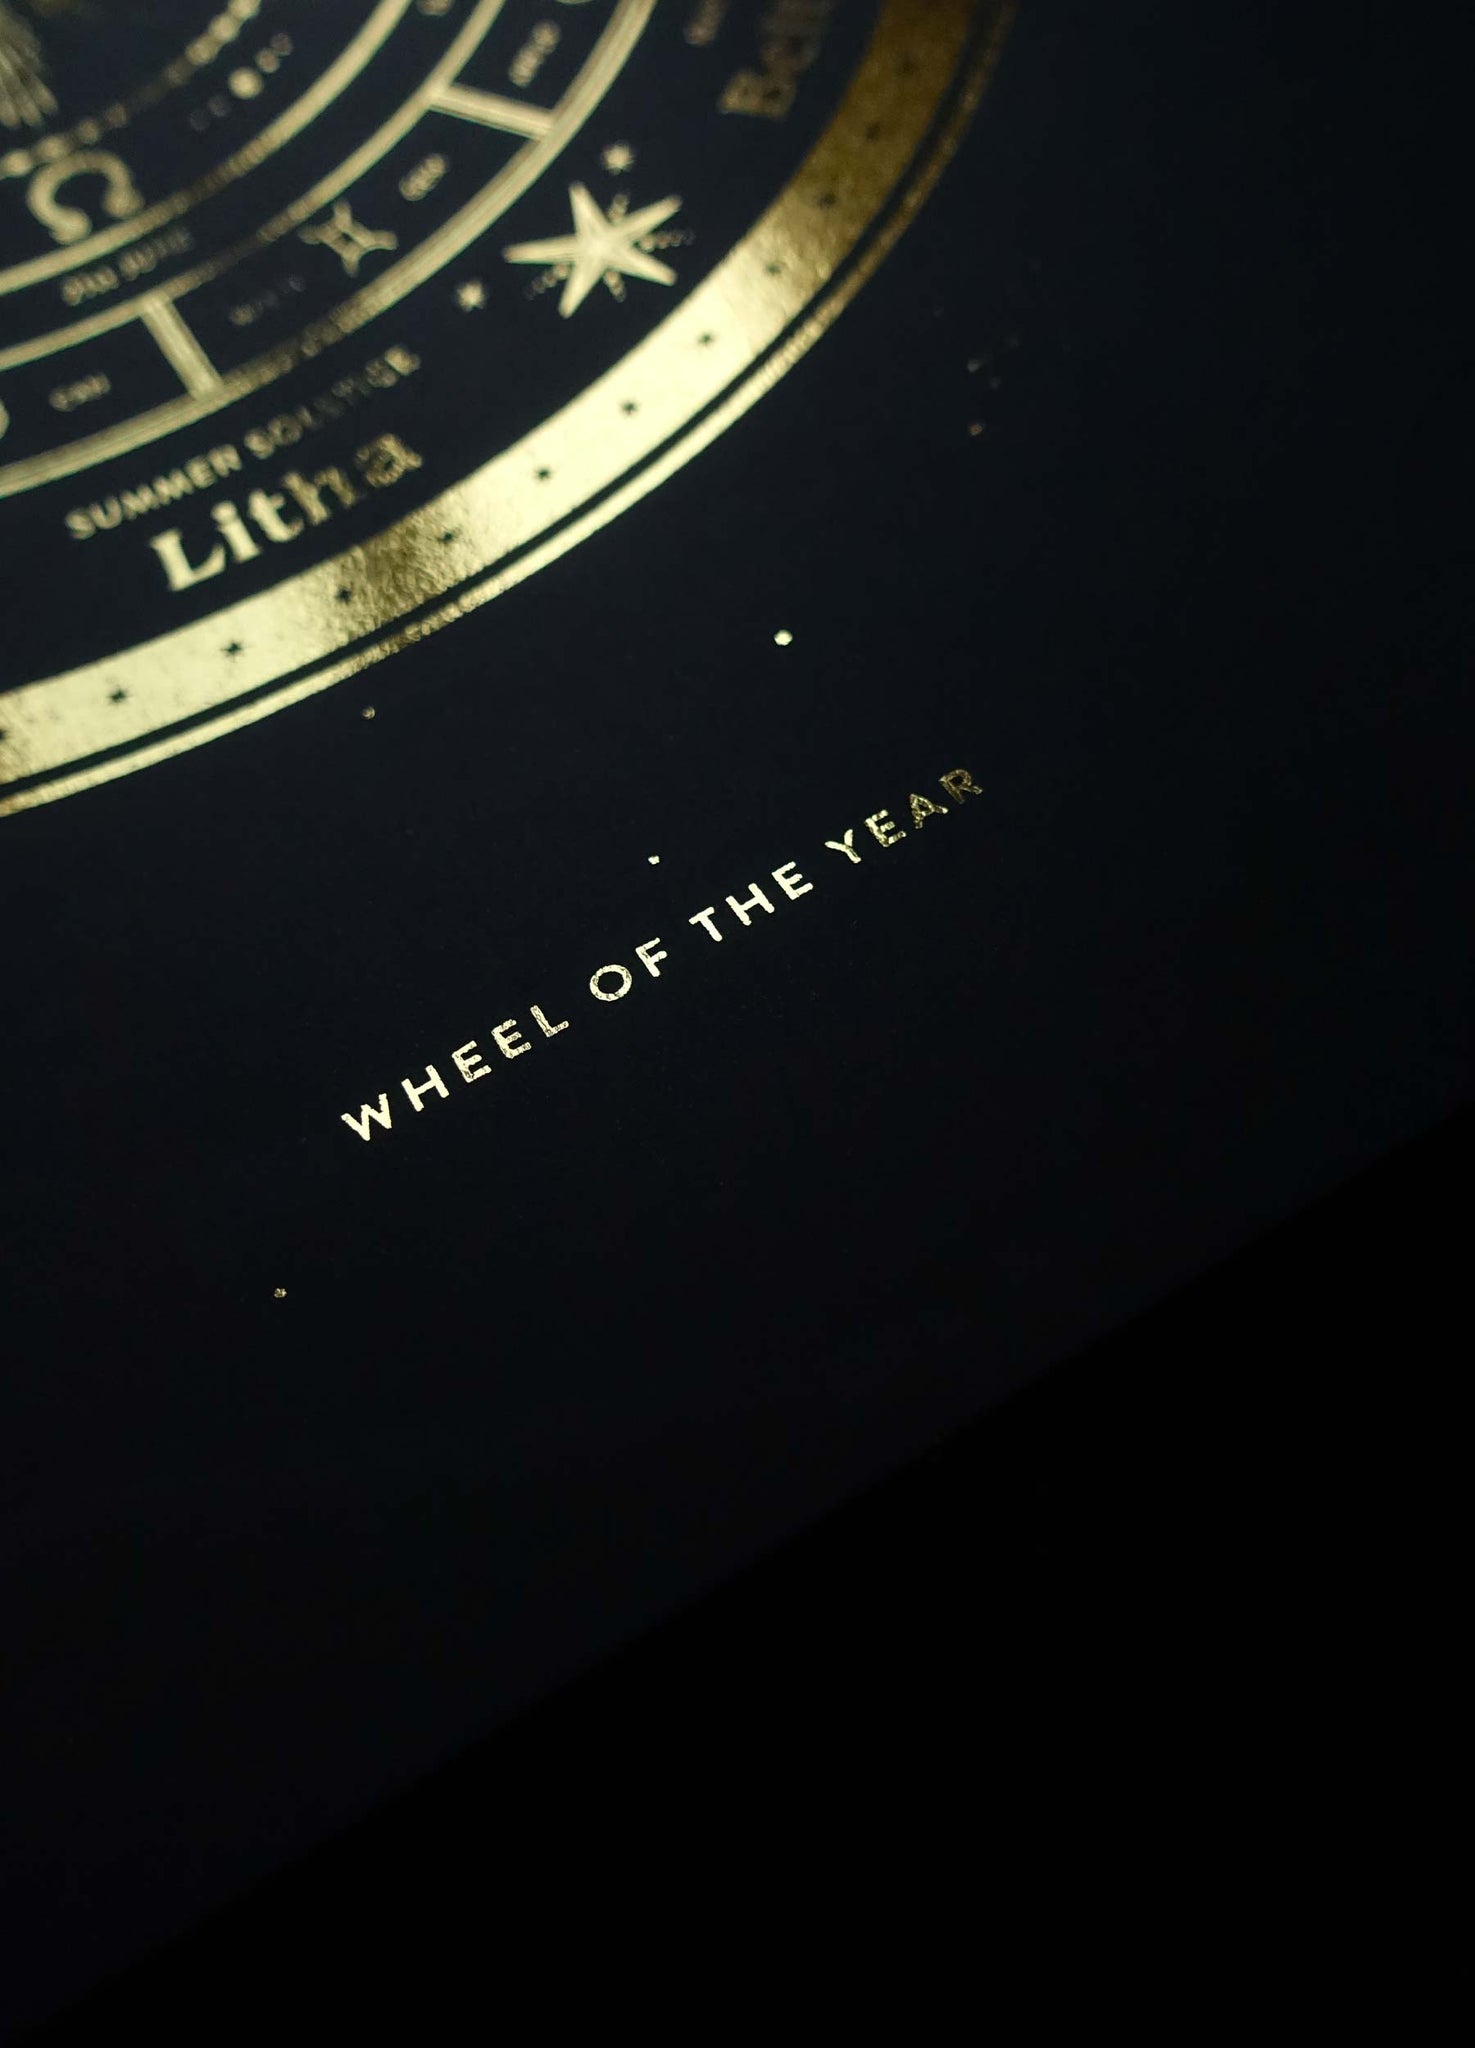 Witch's wheel of the year holiday calendar art print in gold foil and black paper with stars and moon by Cocorrina